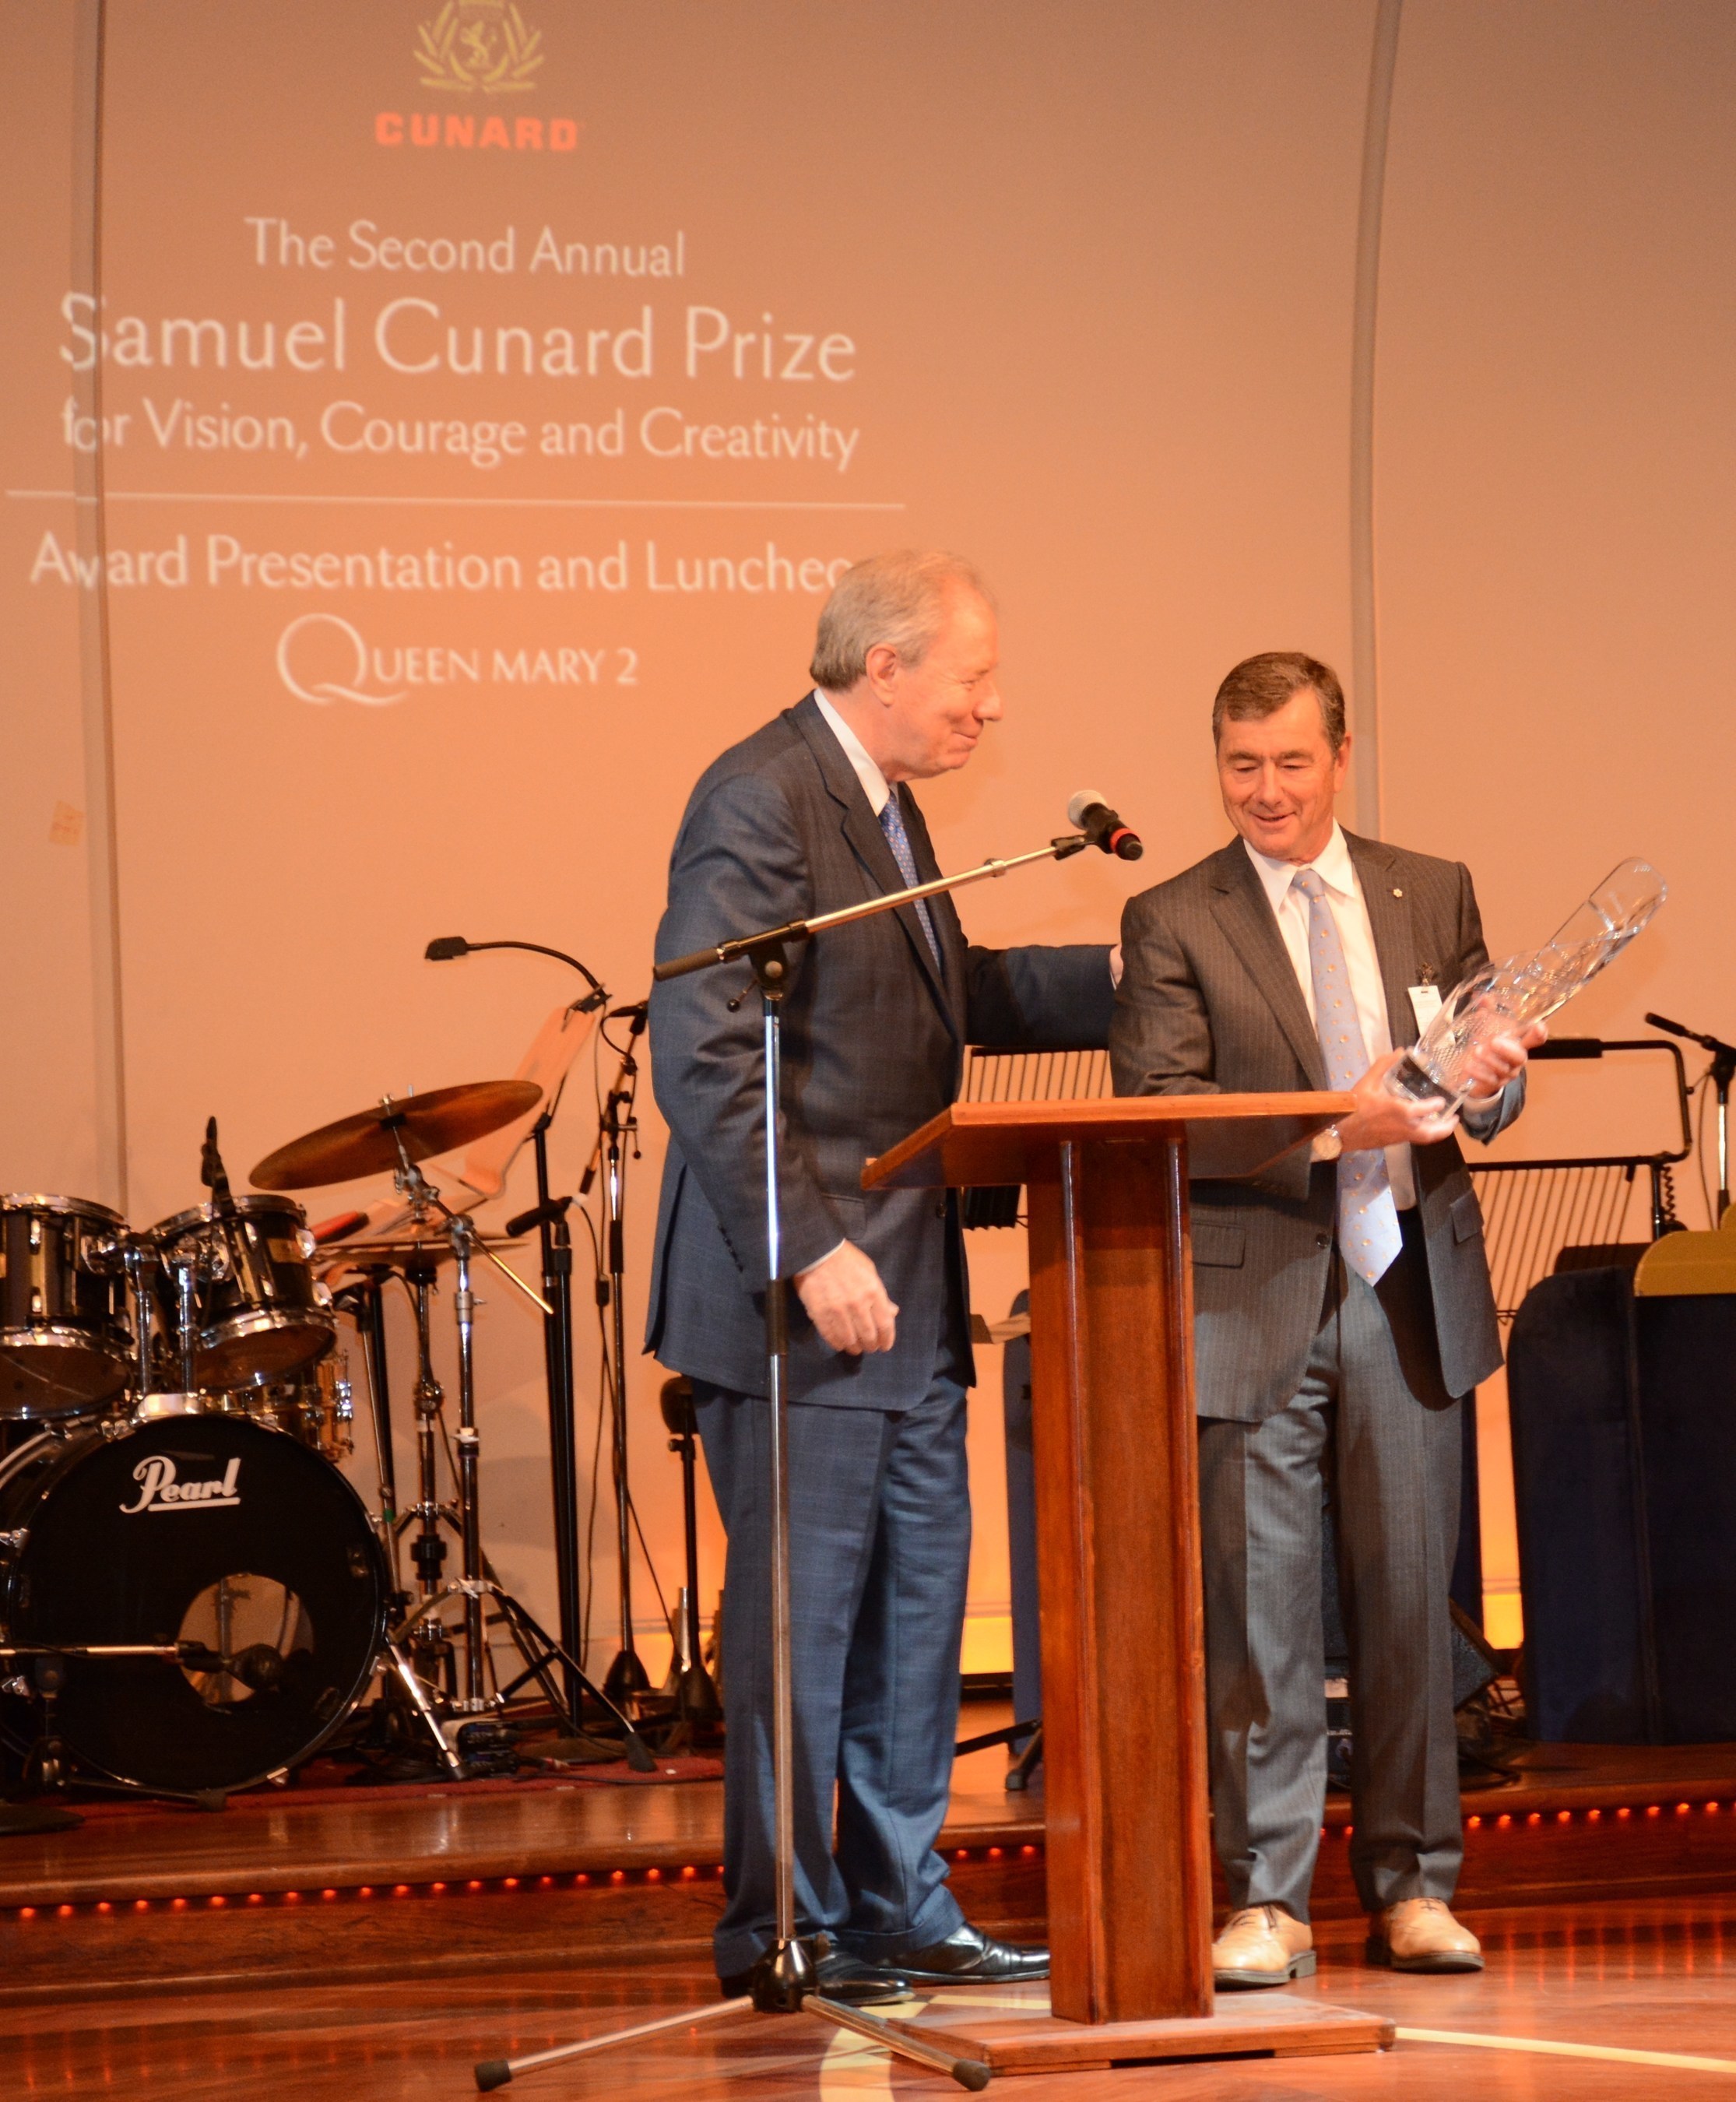 Onboard Cunard's flagship, Queen Mary 2, John Risley, recipient of the Second Annual Samuel Cunard Prize for Vision, Courage and Creativity accepts the award on board from last year's honoree, Jim Irving.